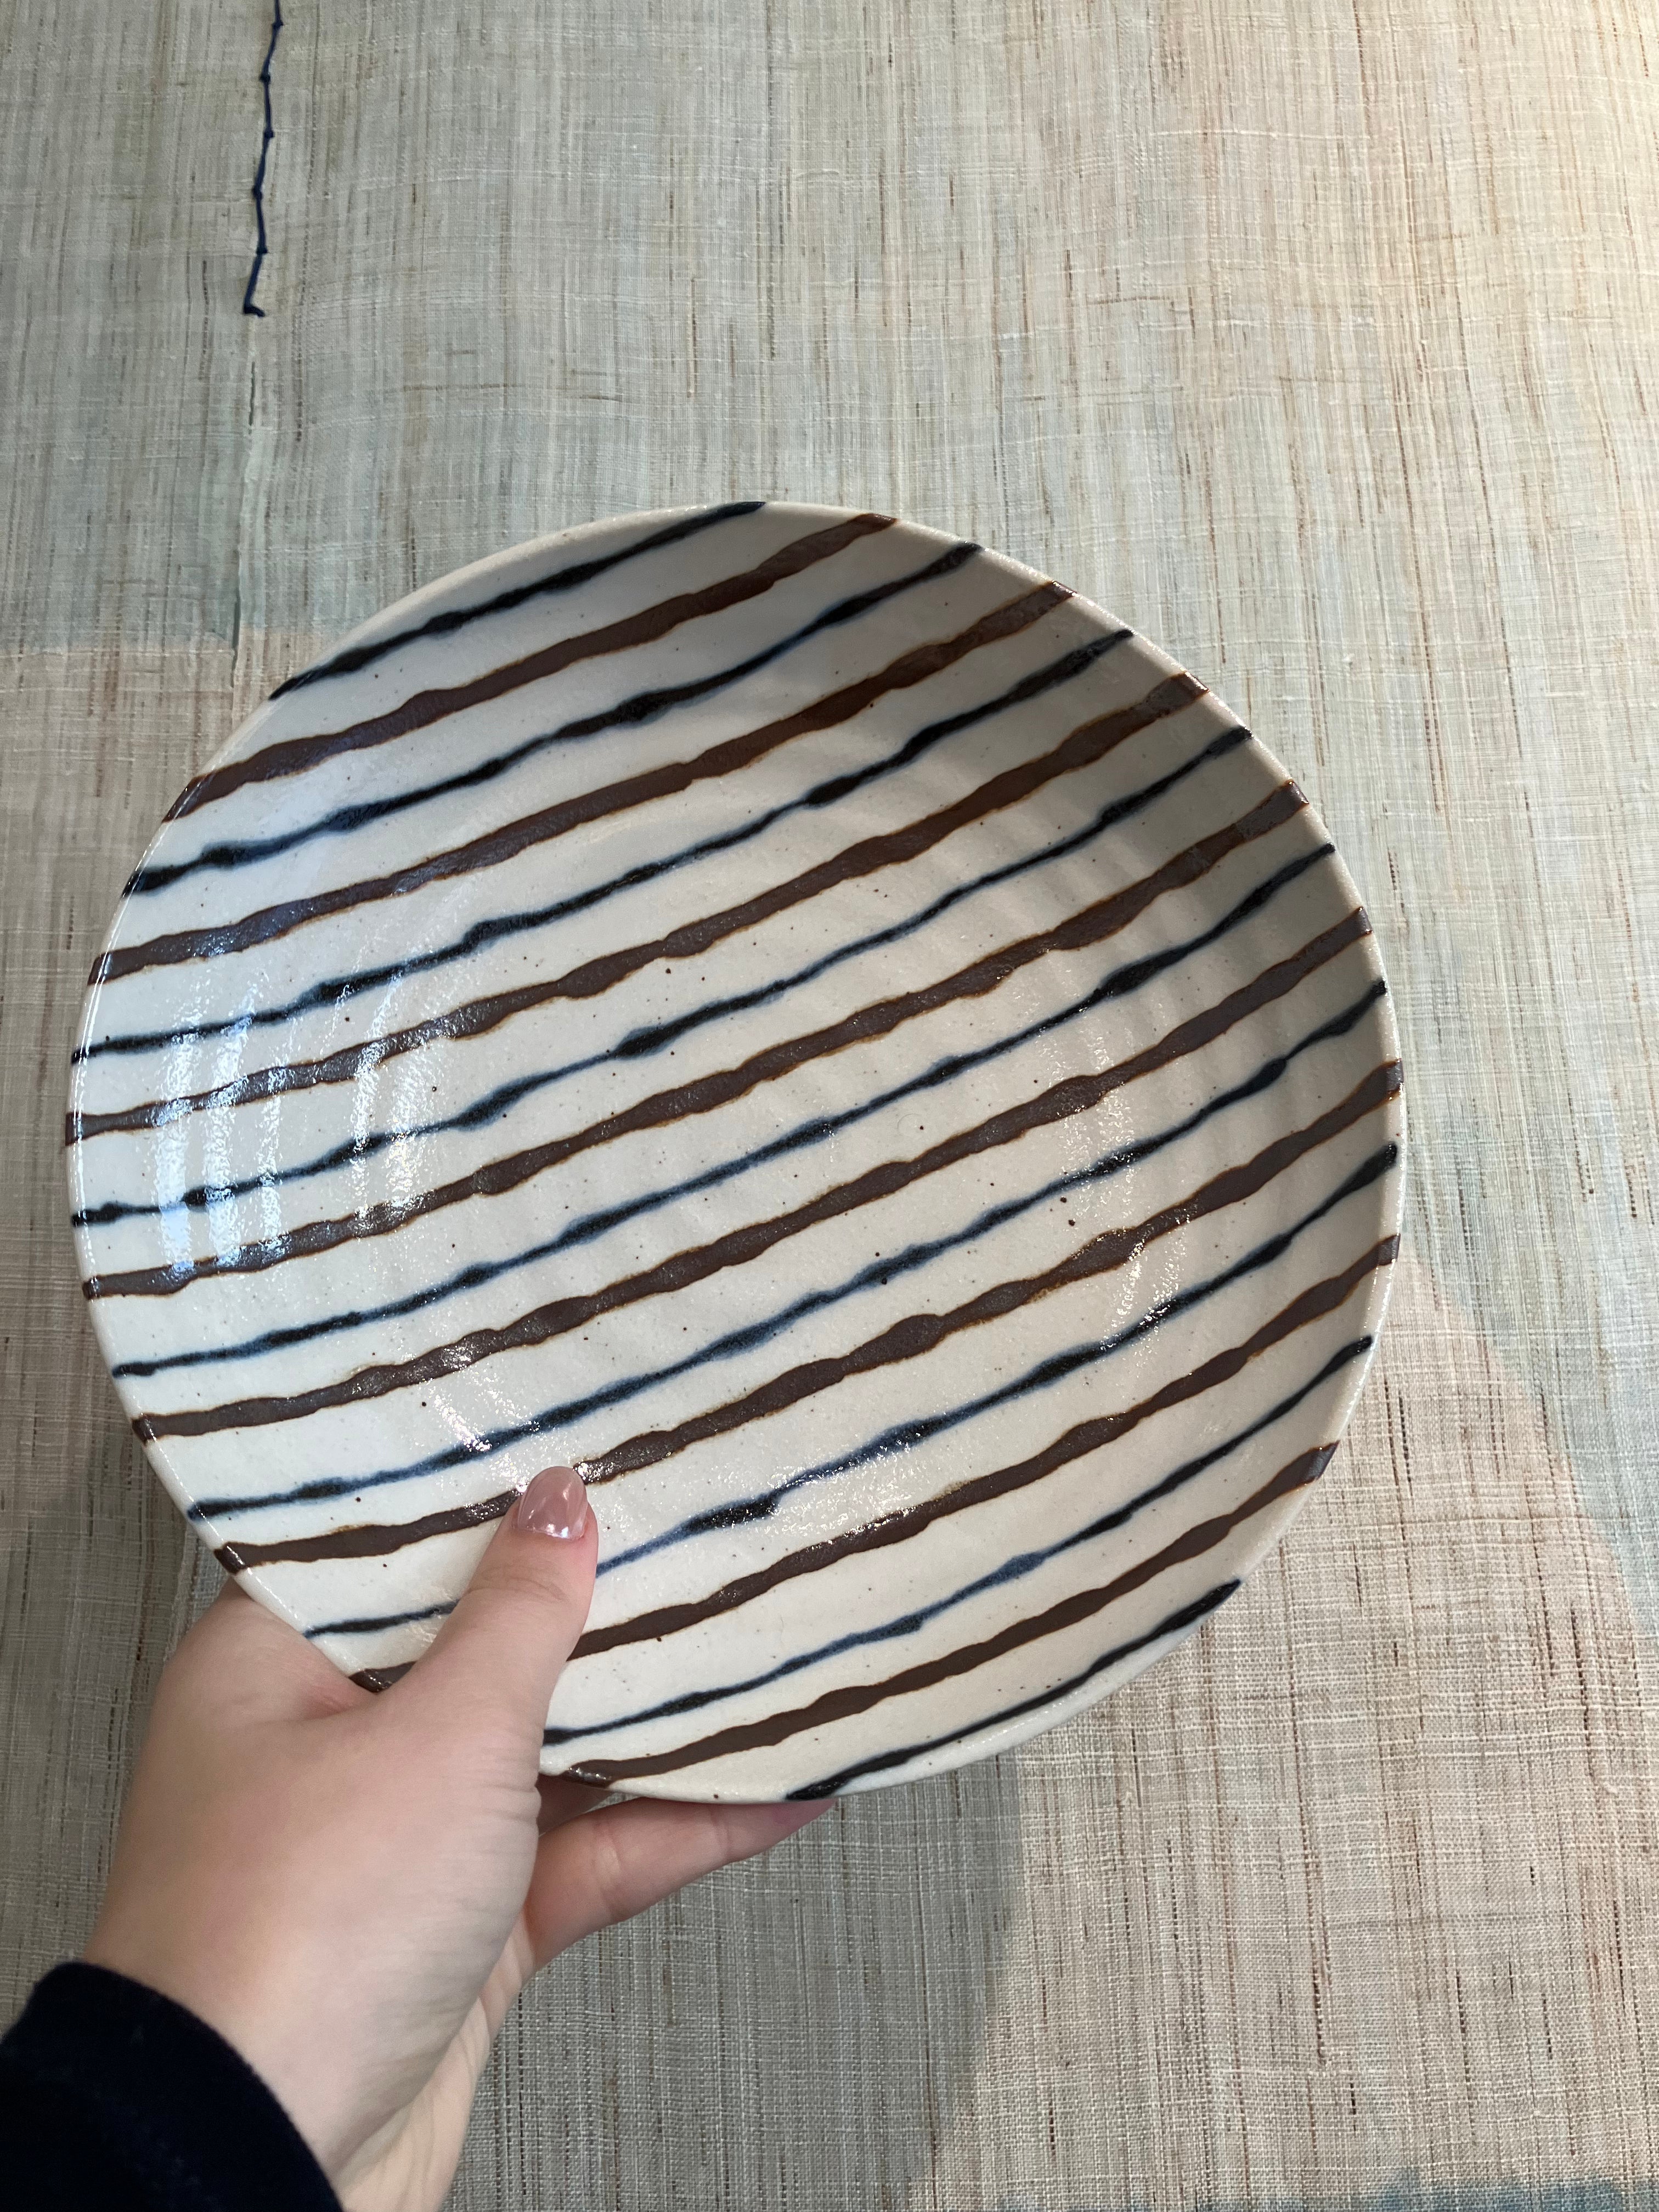 Bowl with blue and brown stripes